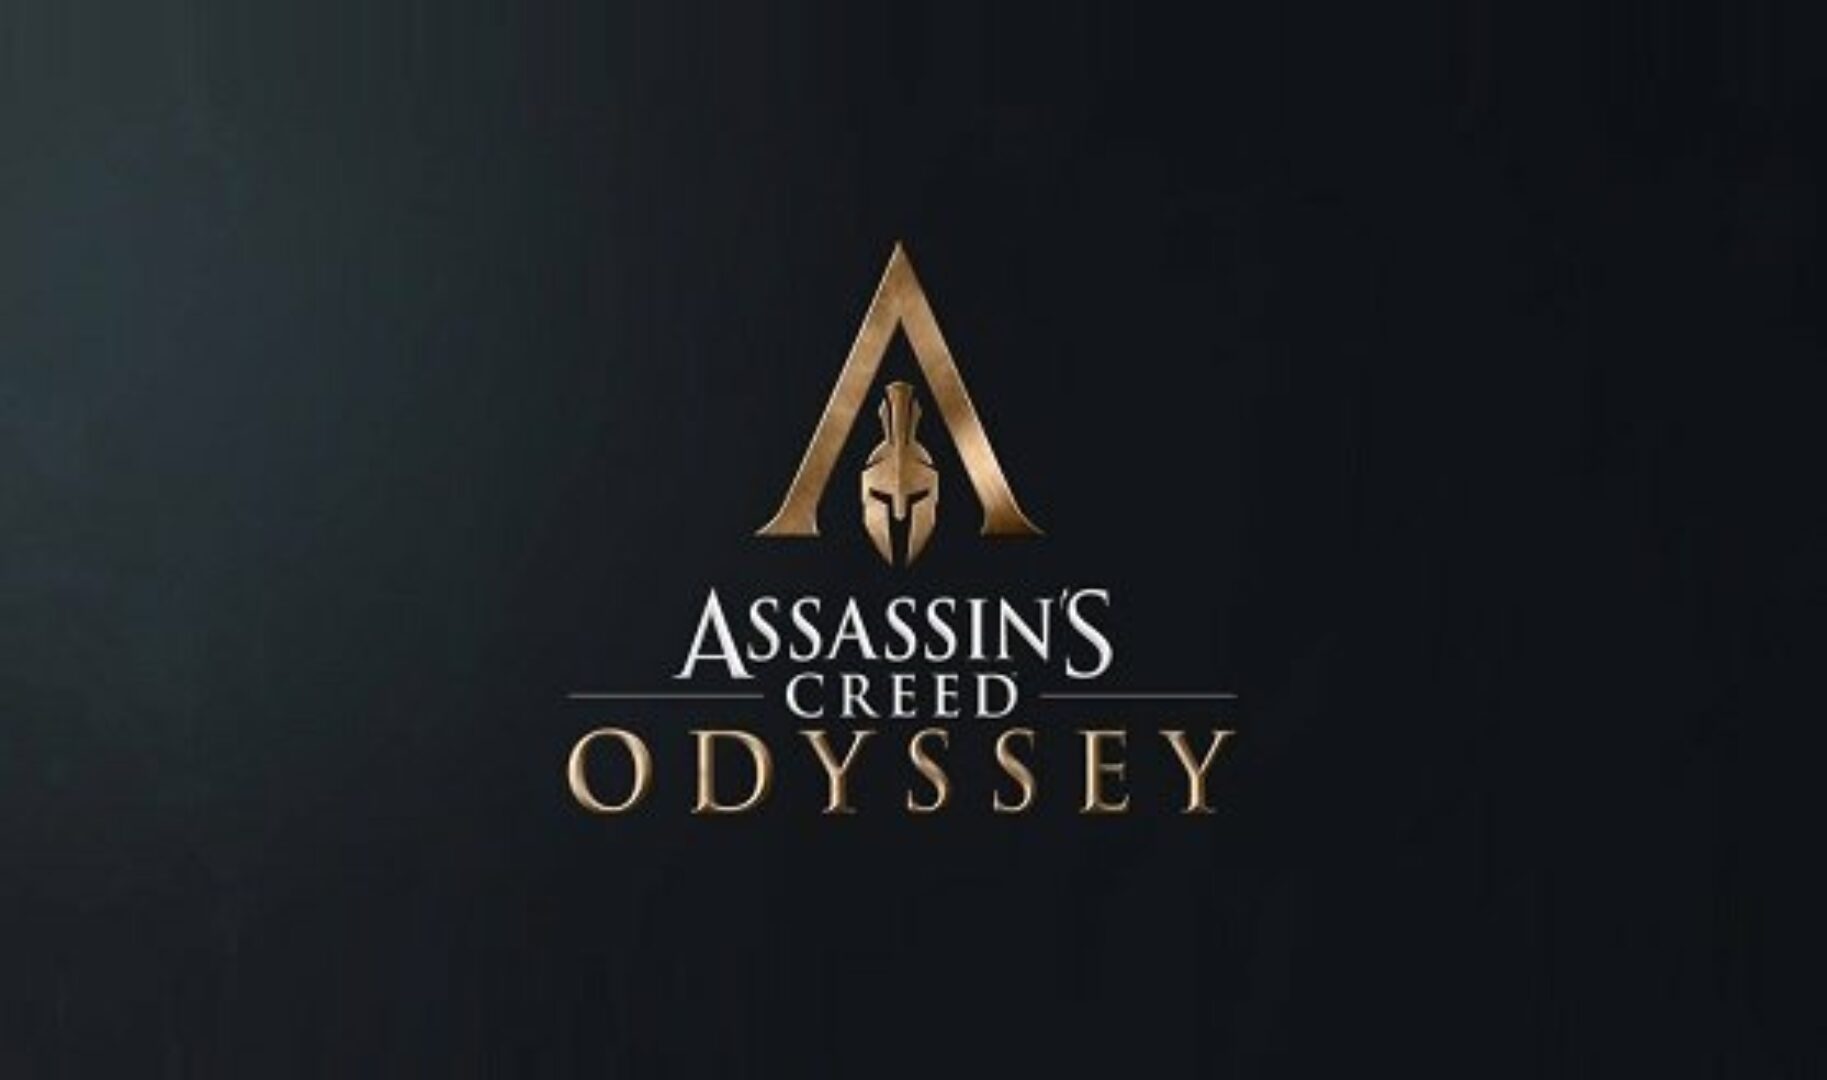 Assassin’s Creed: Odyssey Promises A Full Role-Playing Experience